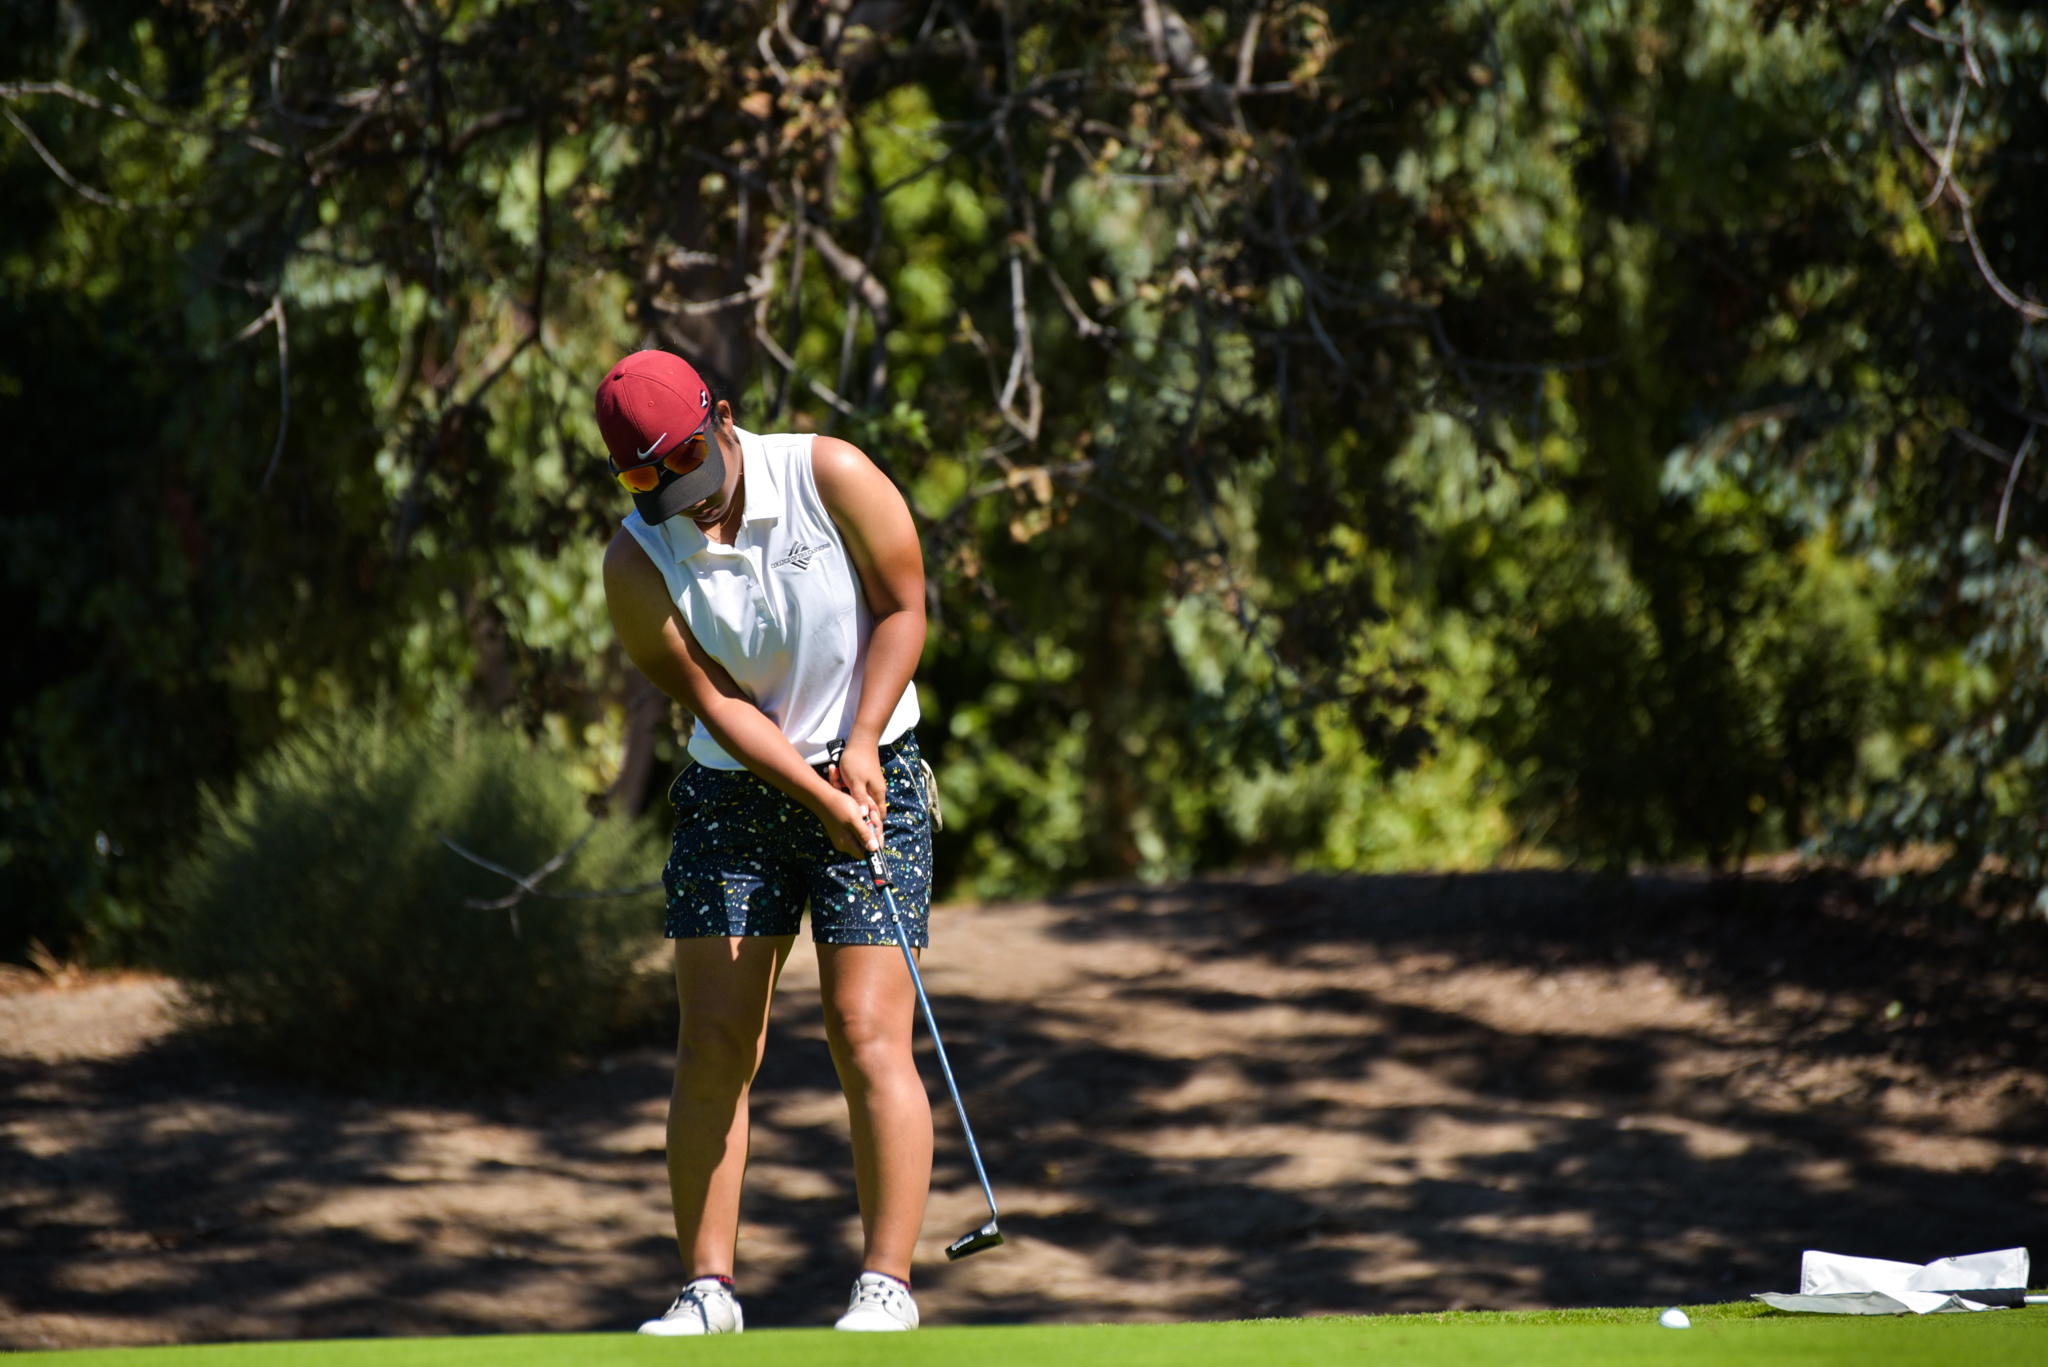 College of the Canyons women's golf stock image.